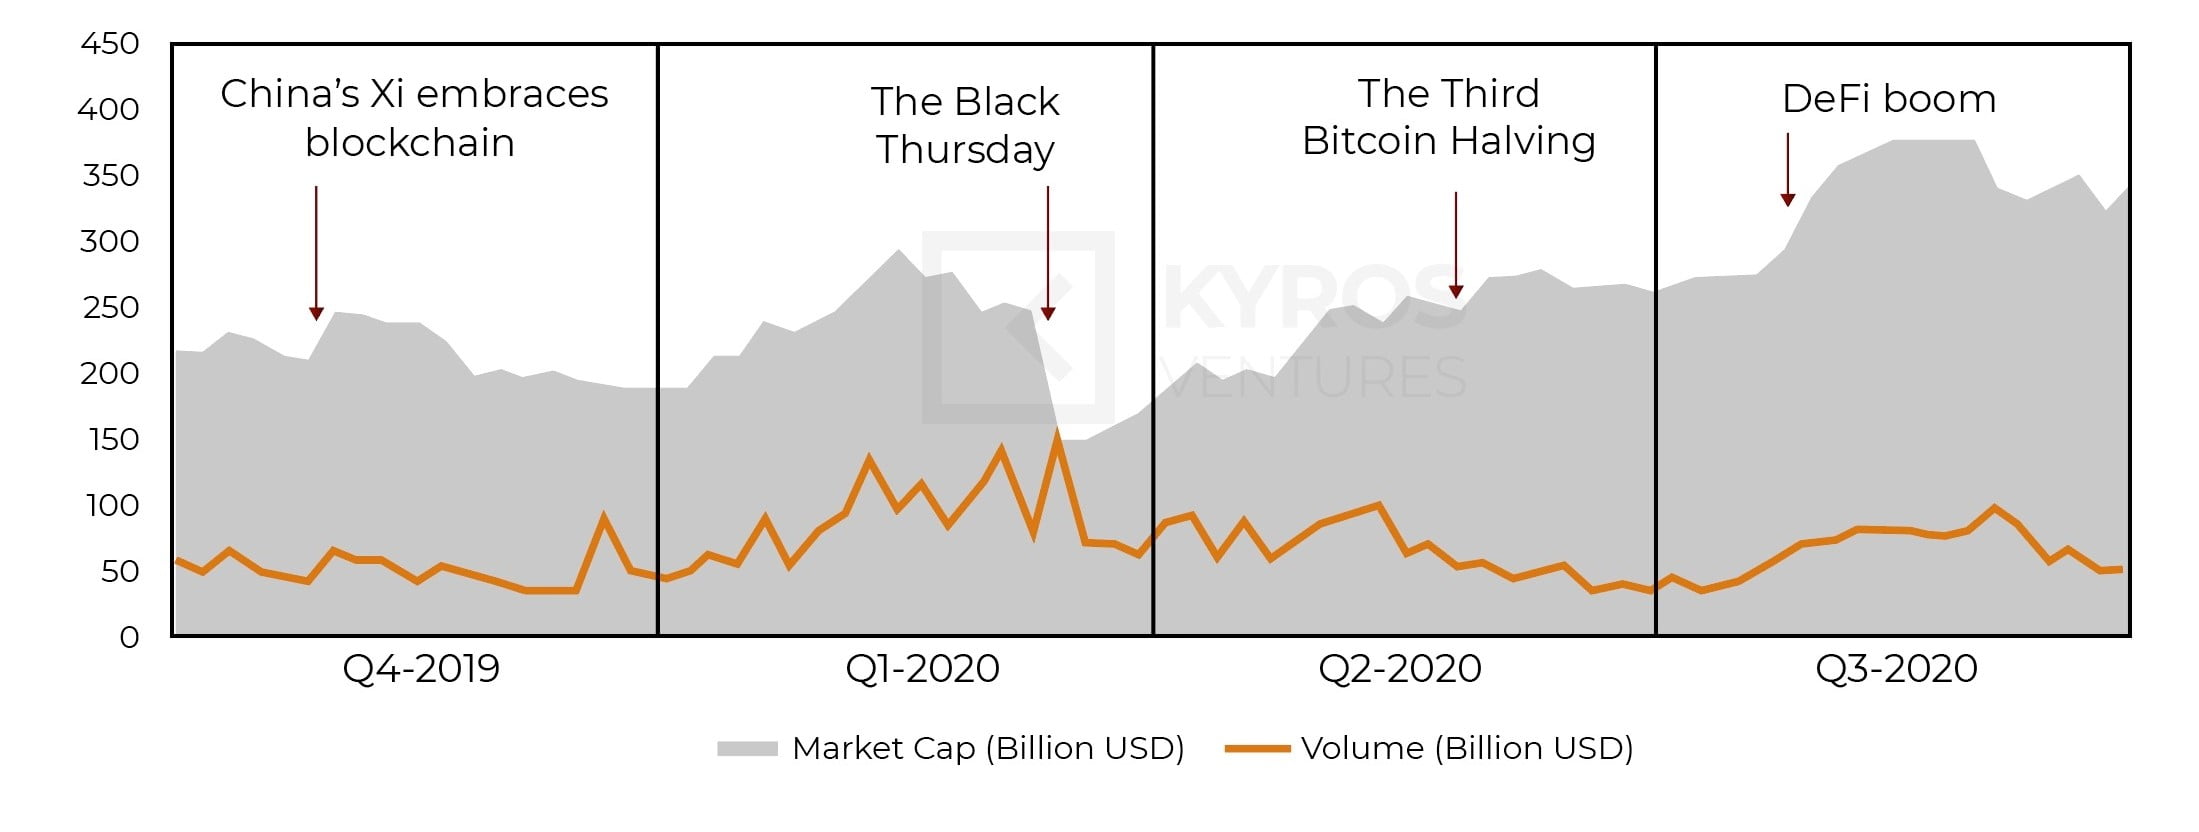 Kyros Research's Quarterly Report - Q3 2020